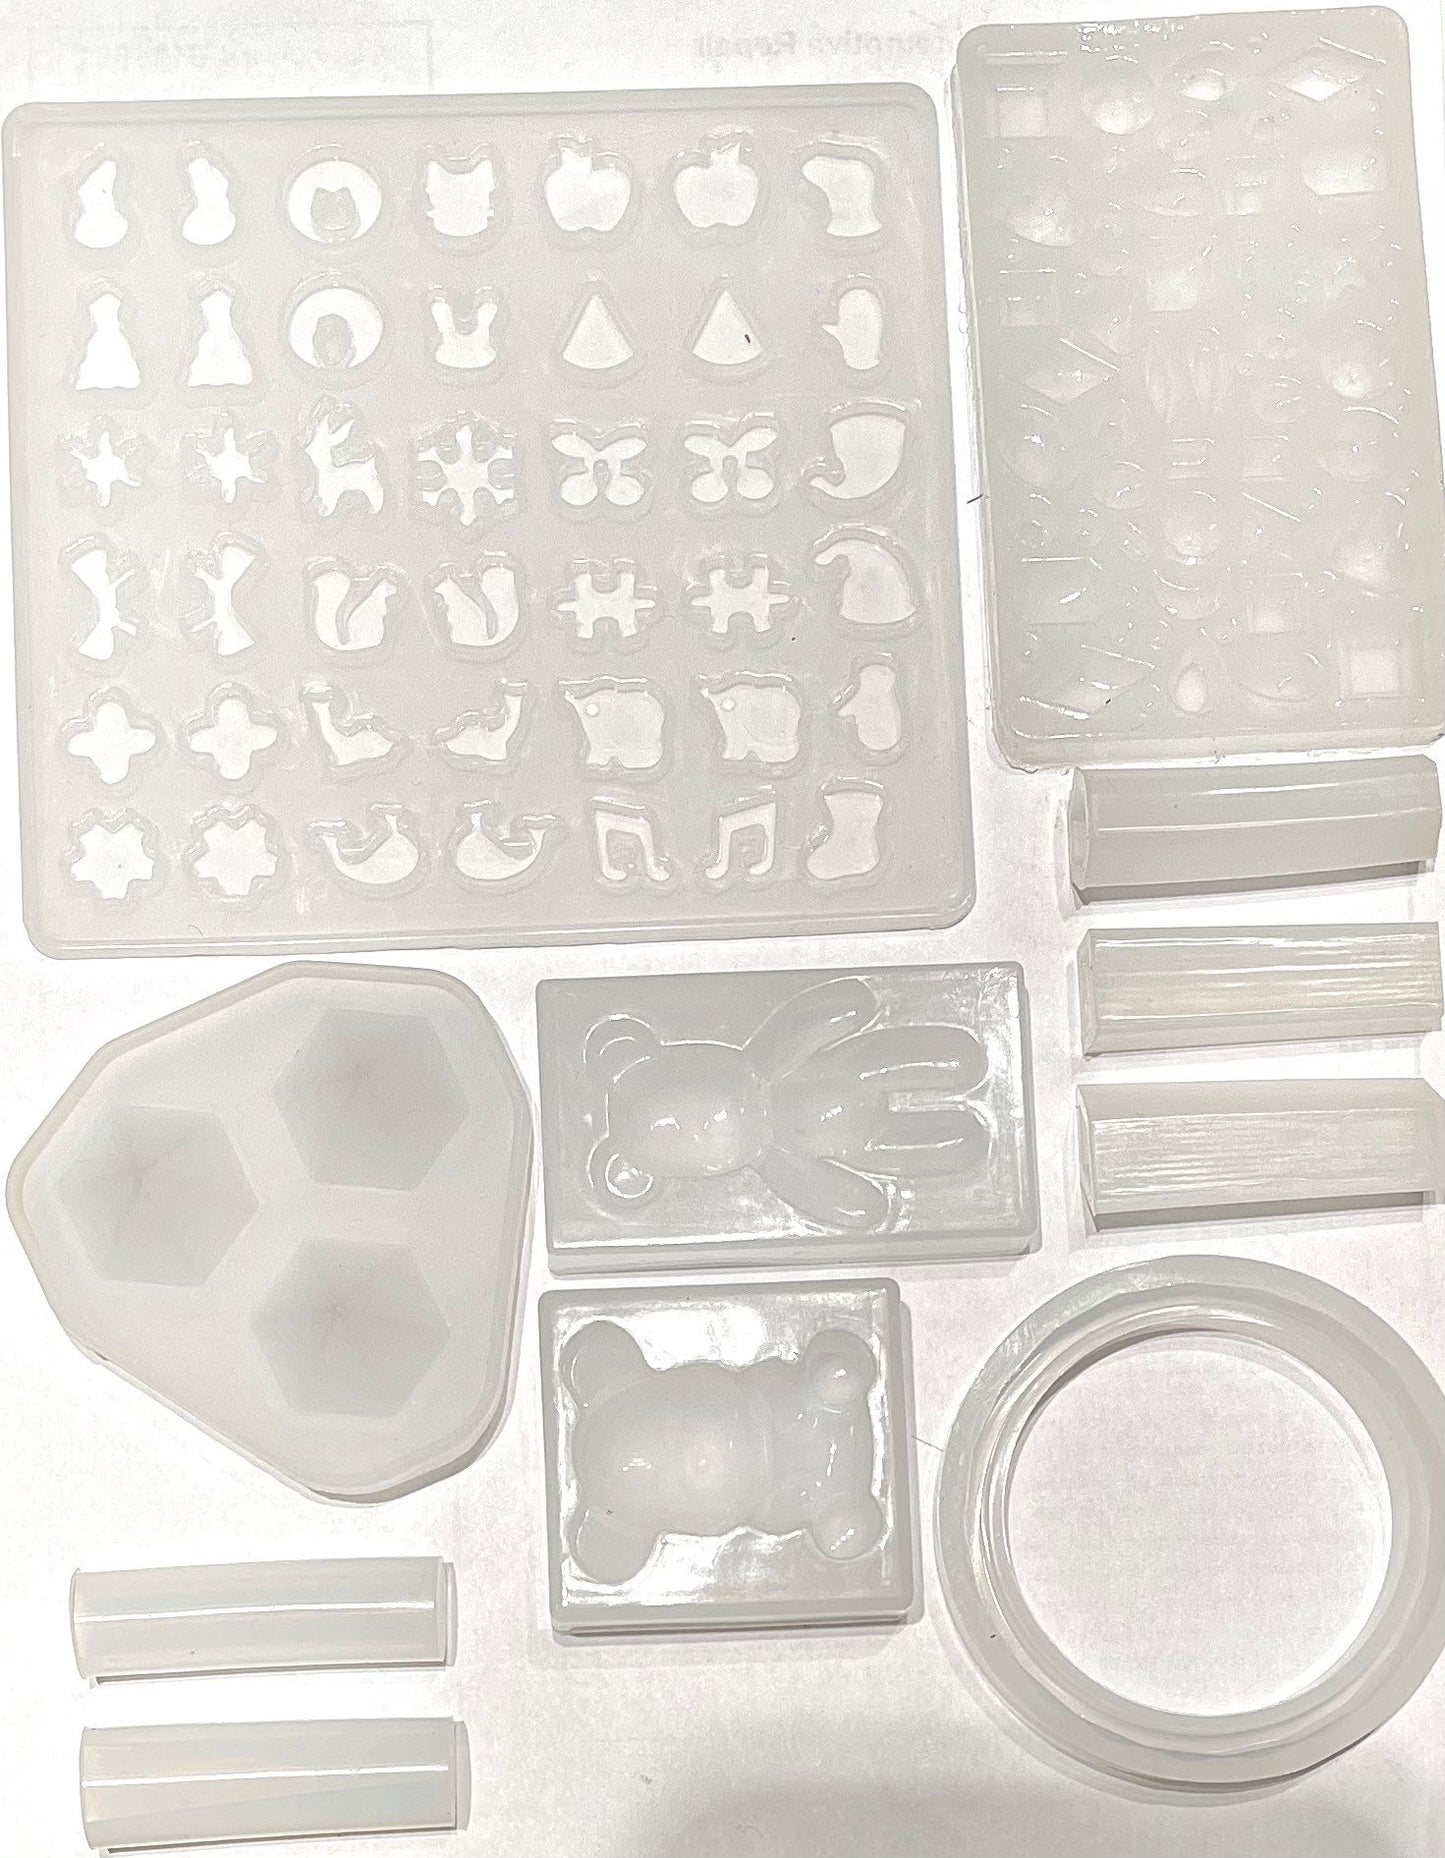 Pendant Charm Jewelry Silicone Mold Accessory Kit with Hardware